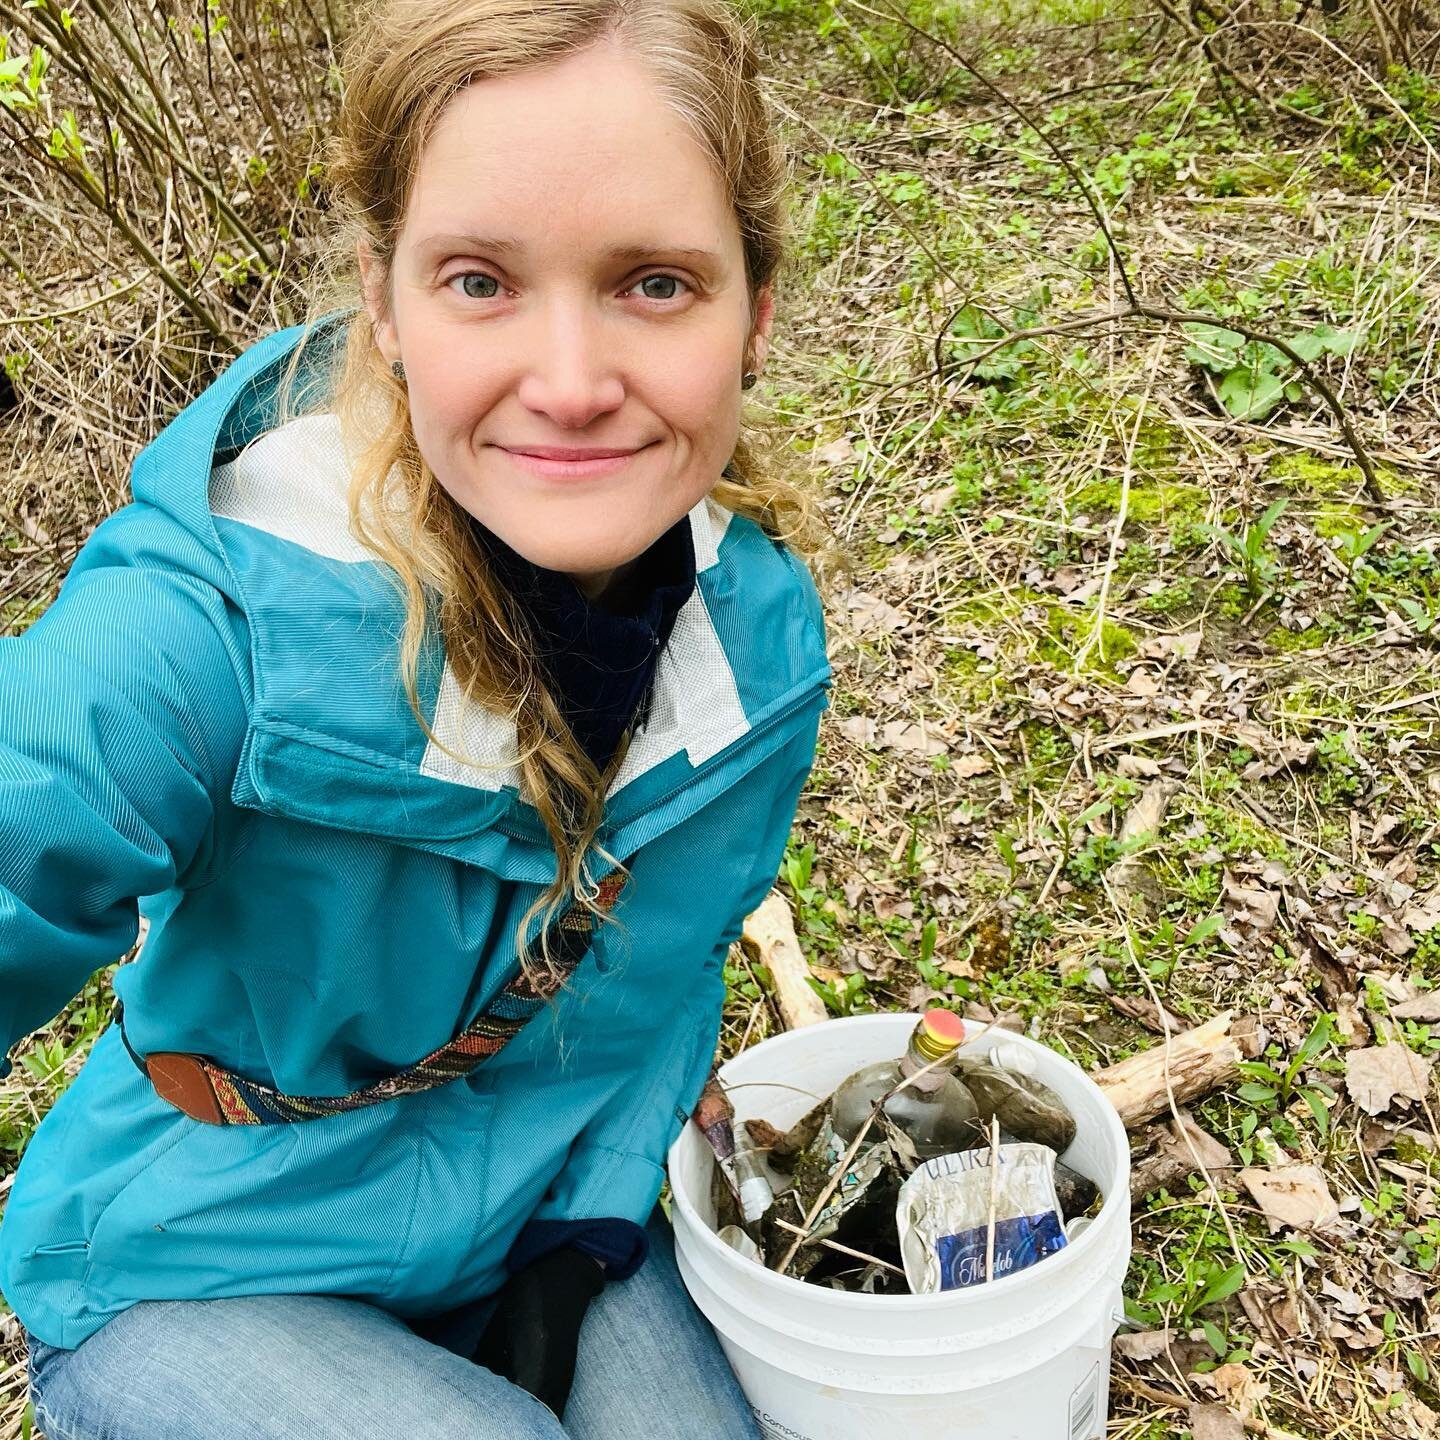 Happy Earth Day my friends 🌎💛✌🏾

This was my first Earth Day with @ctriverconservancy and it was incredible to participate in several local environmental activities that benefit the Connecticut River and surrounding ecosystems. 

I went to a river